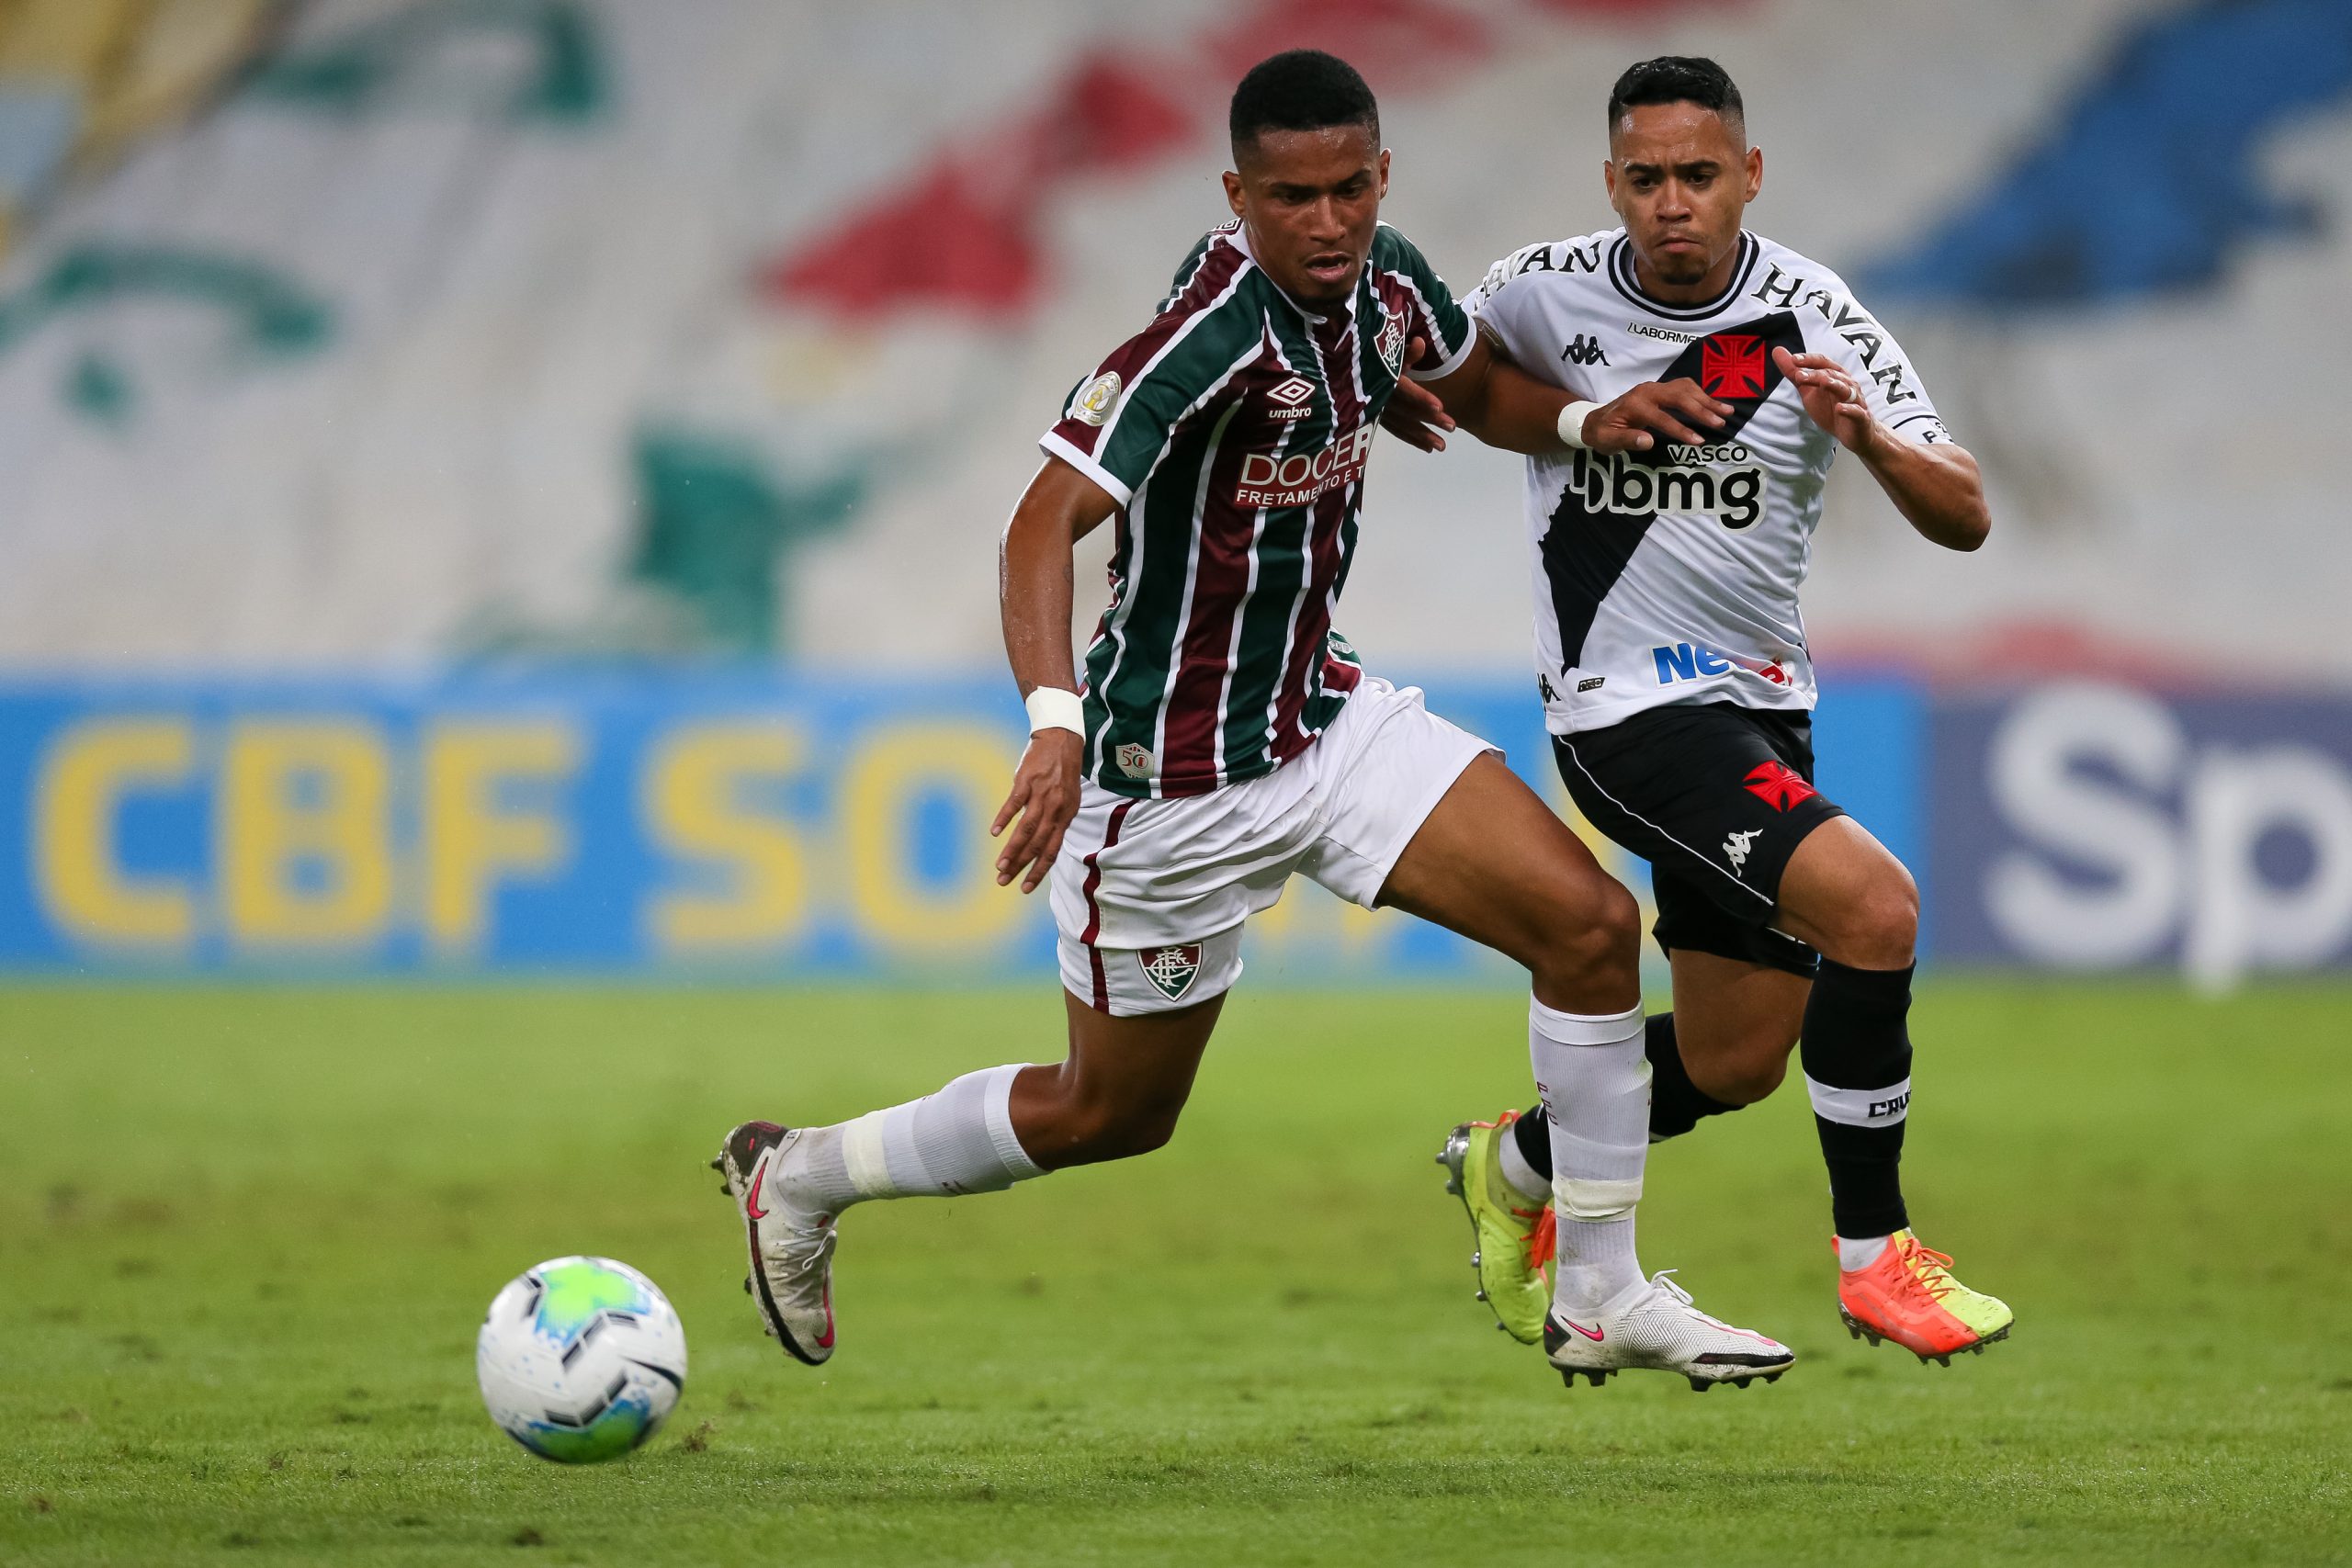 Marcos Paulo (L) in action against Vasco da Gama (Getty Images)